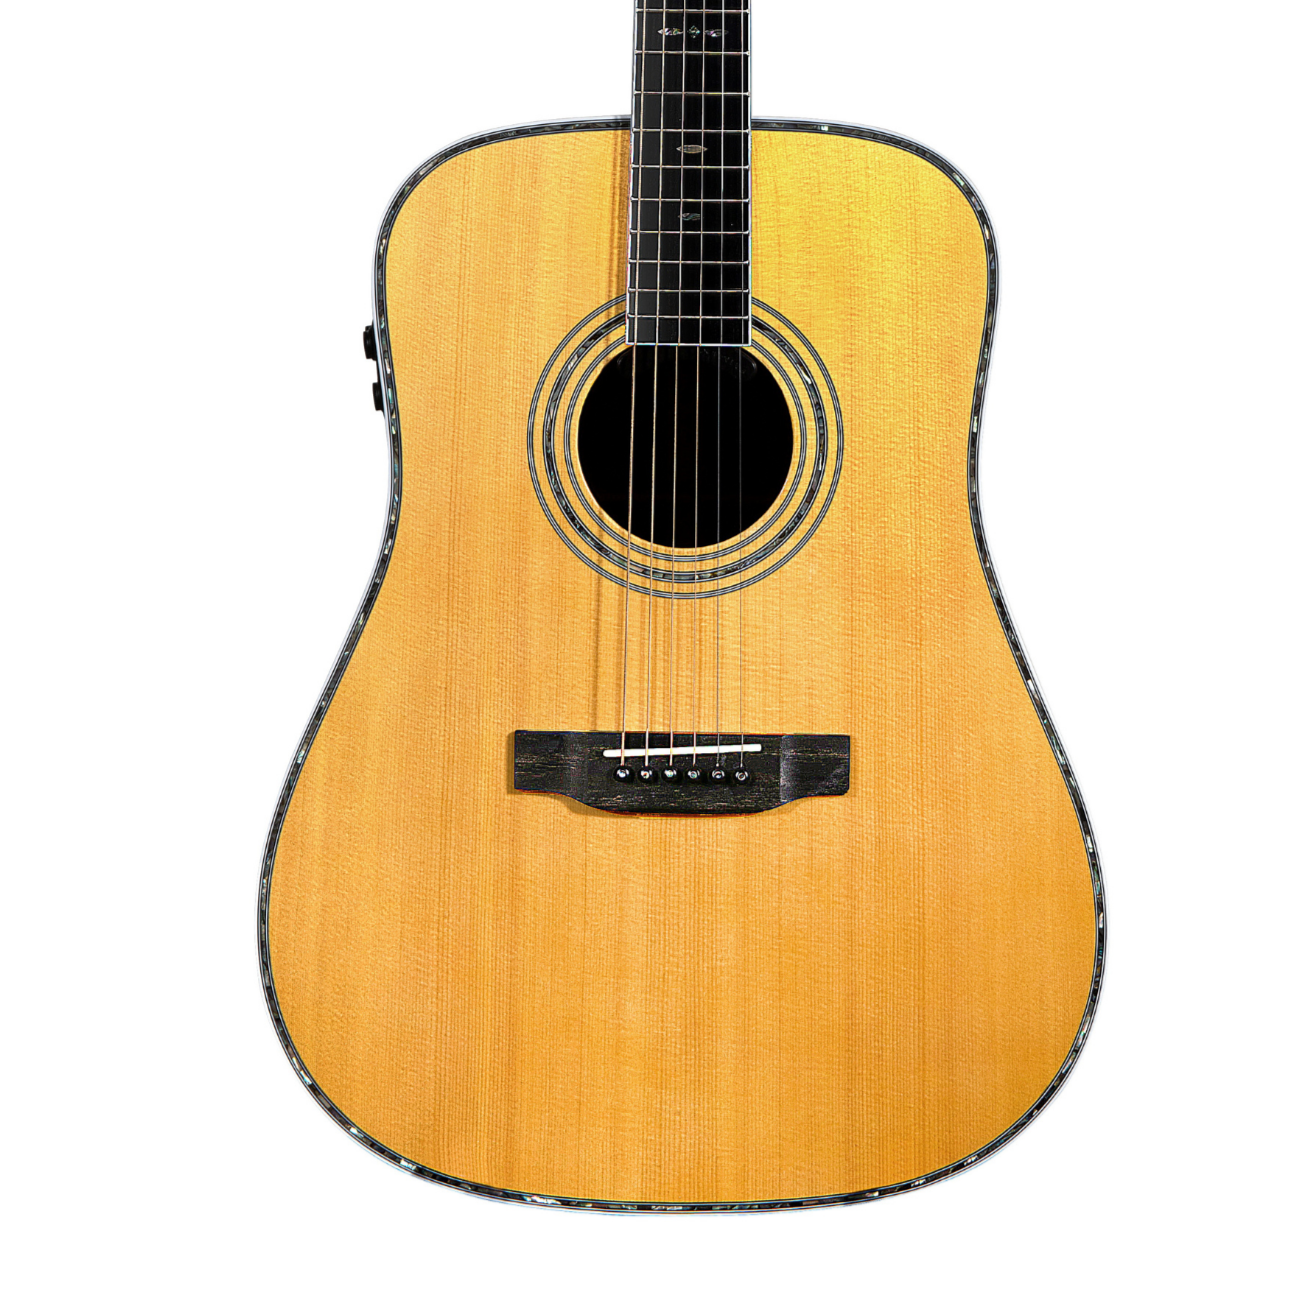 Enya T10S-De 41" Tribute Series Sitka Spruce Solid Top Dreadnought Acoustic Guitar EQ With Hardcase | ENYA , Zoso Music